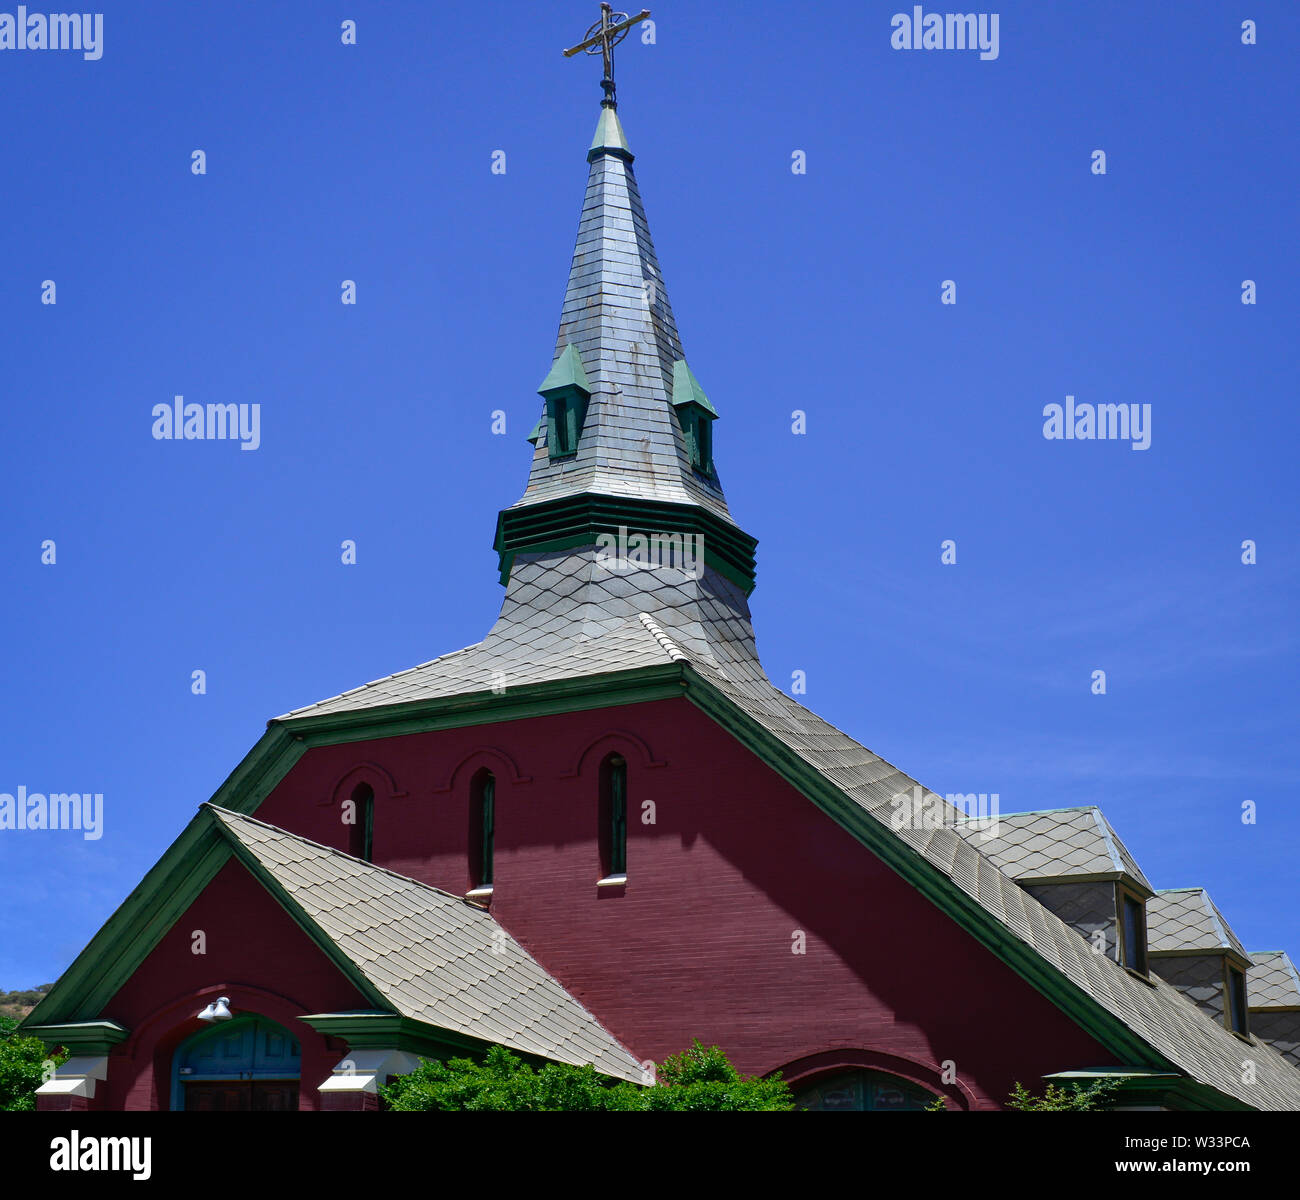 The steeple is a landmark icon of the impressive Covenant Presbyterian Church, in the old mining town of Bisbee, AZ USA Stock Photo